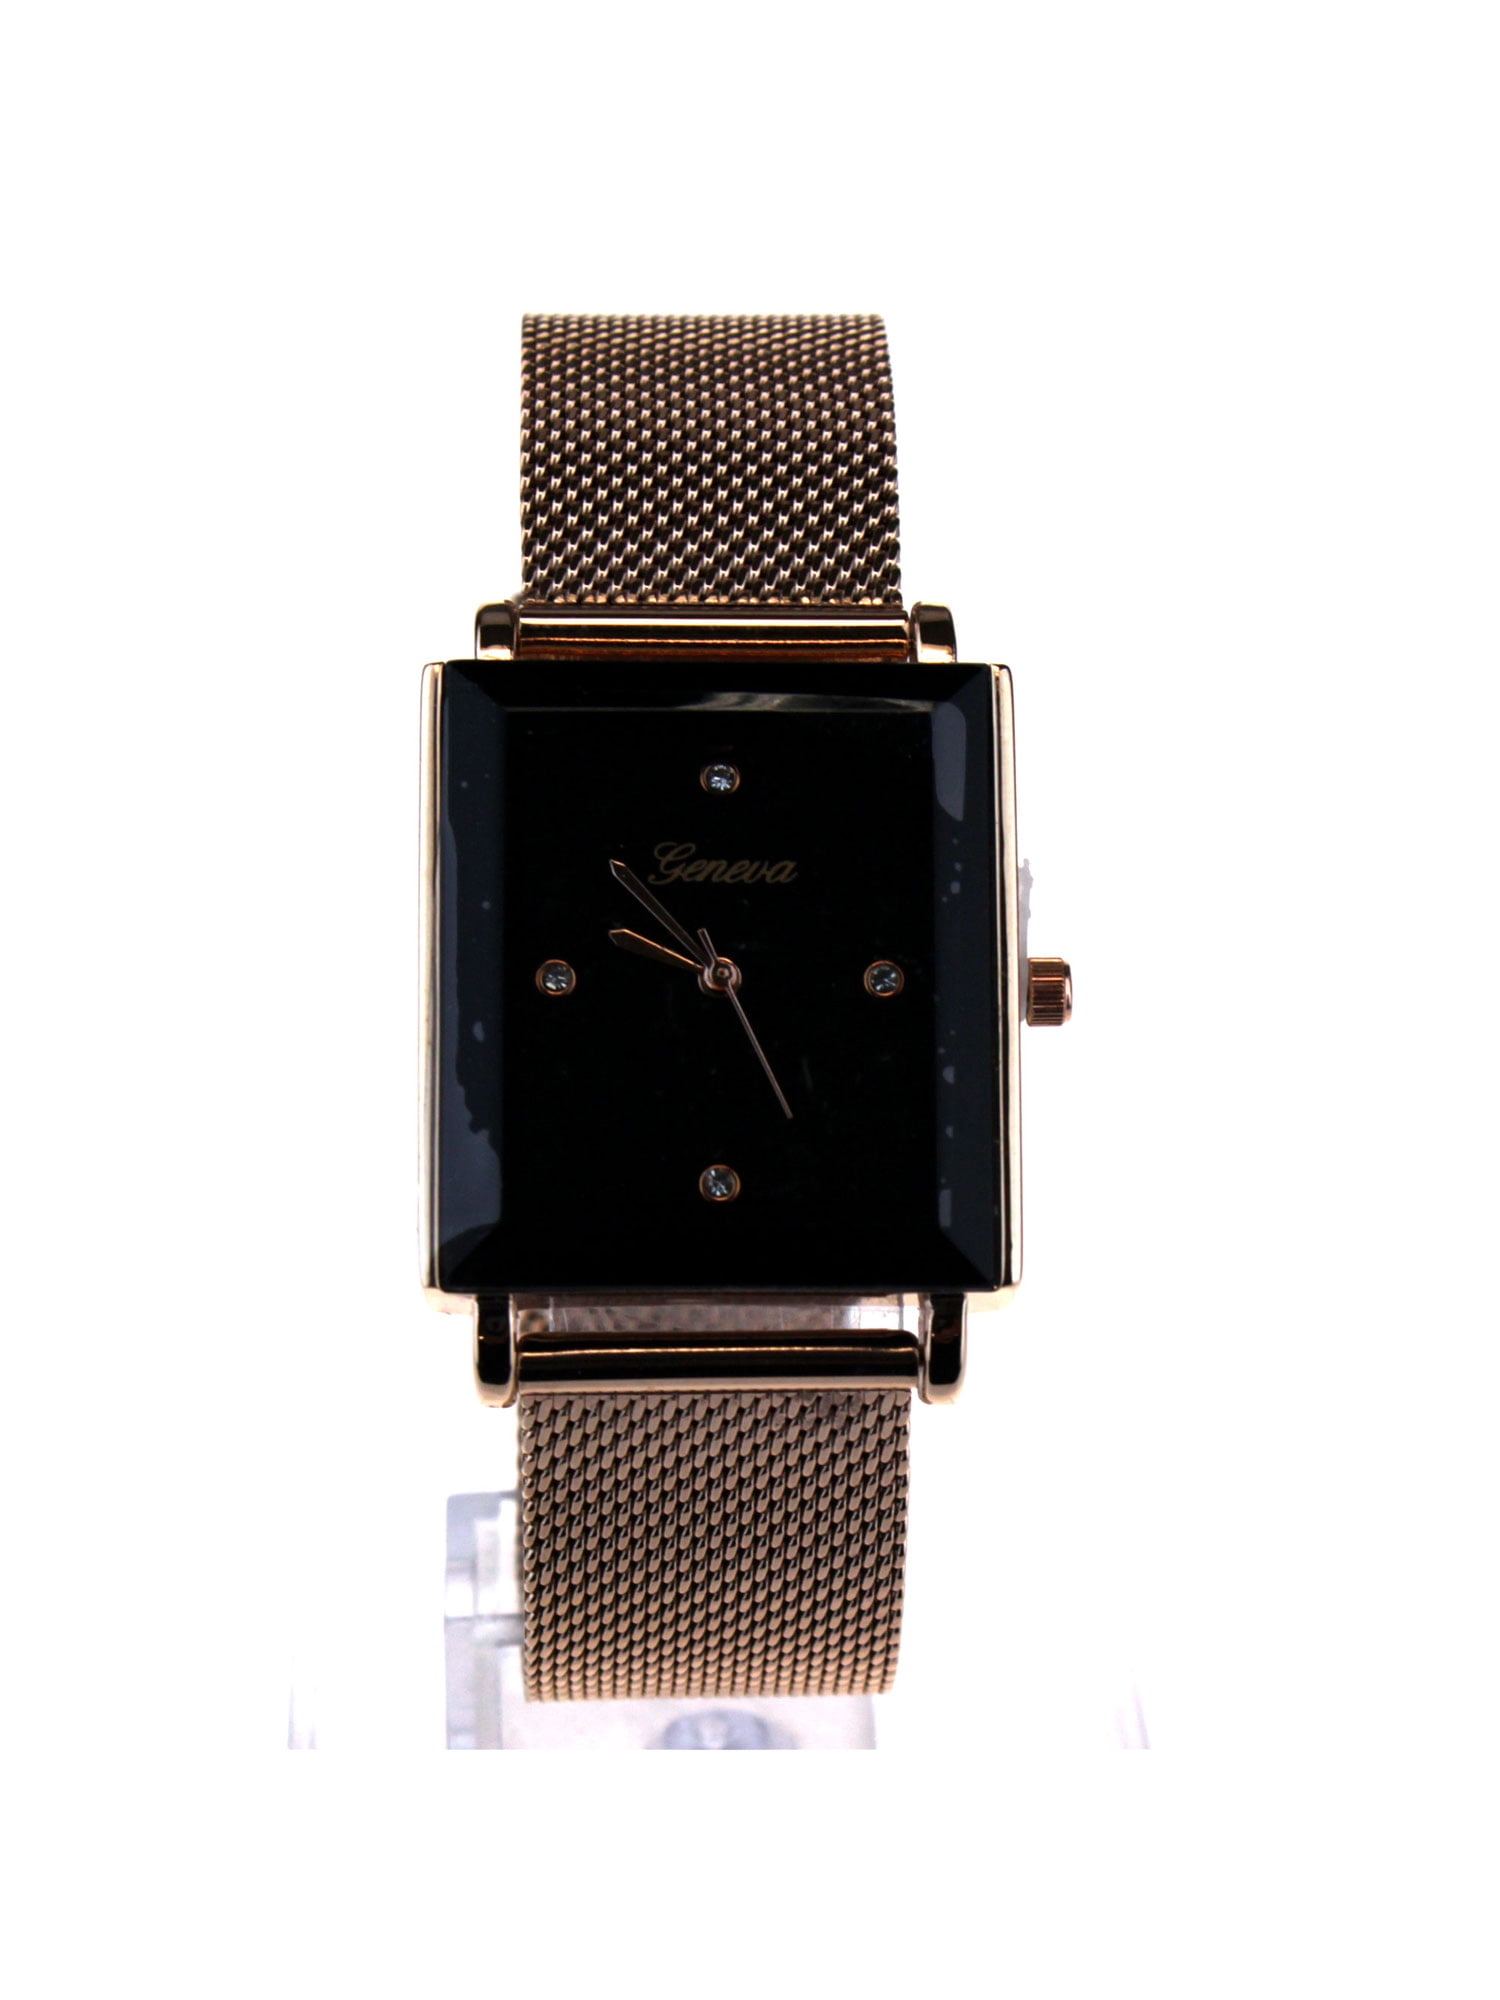 Fashion Rectangle Watches Men LED Digital Watches Men Luxury Rose Gold  Magnetic Mesh Band Electronic Wristwatches